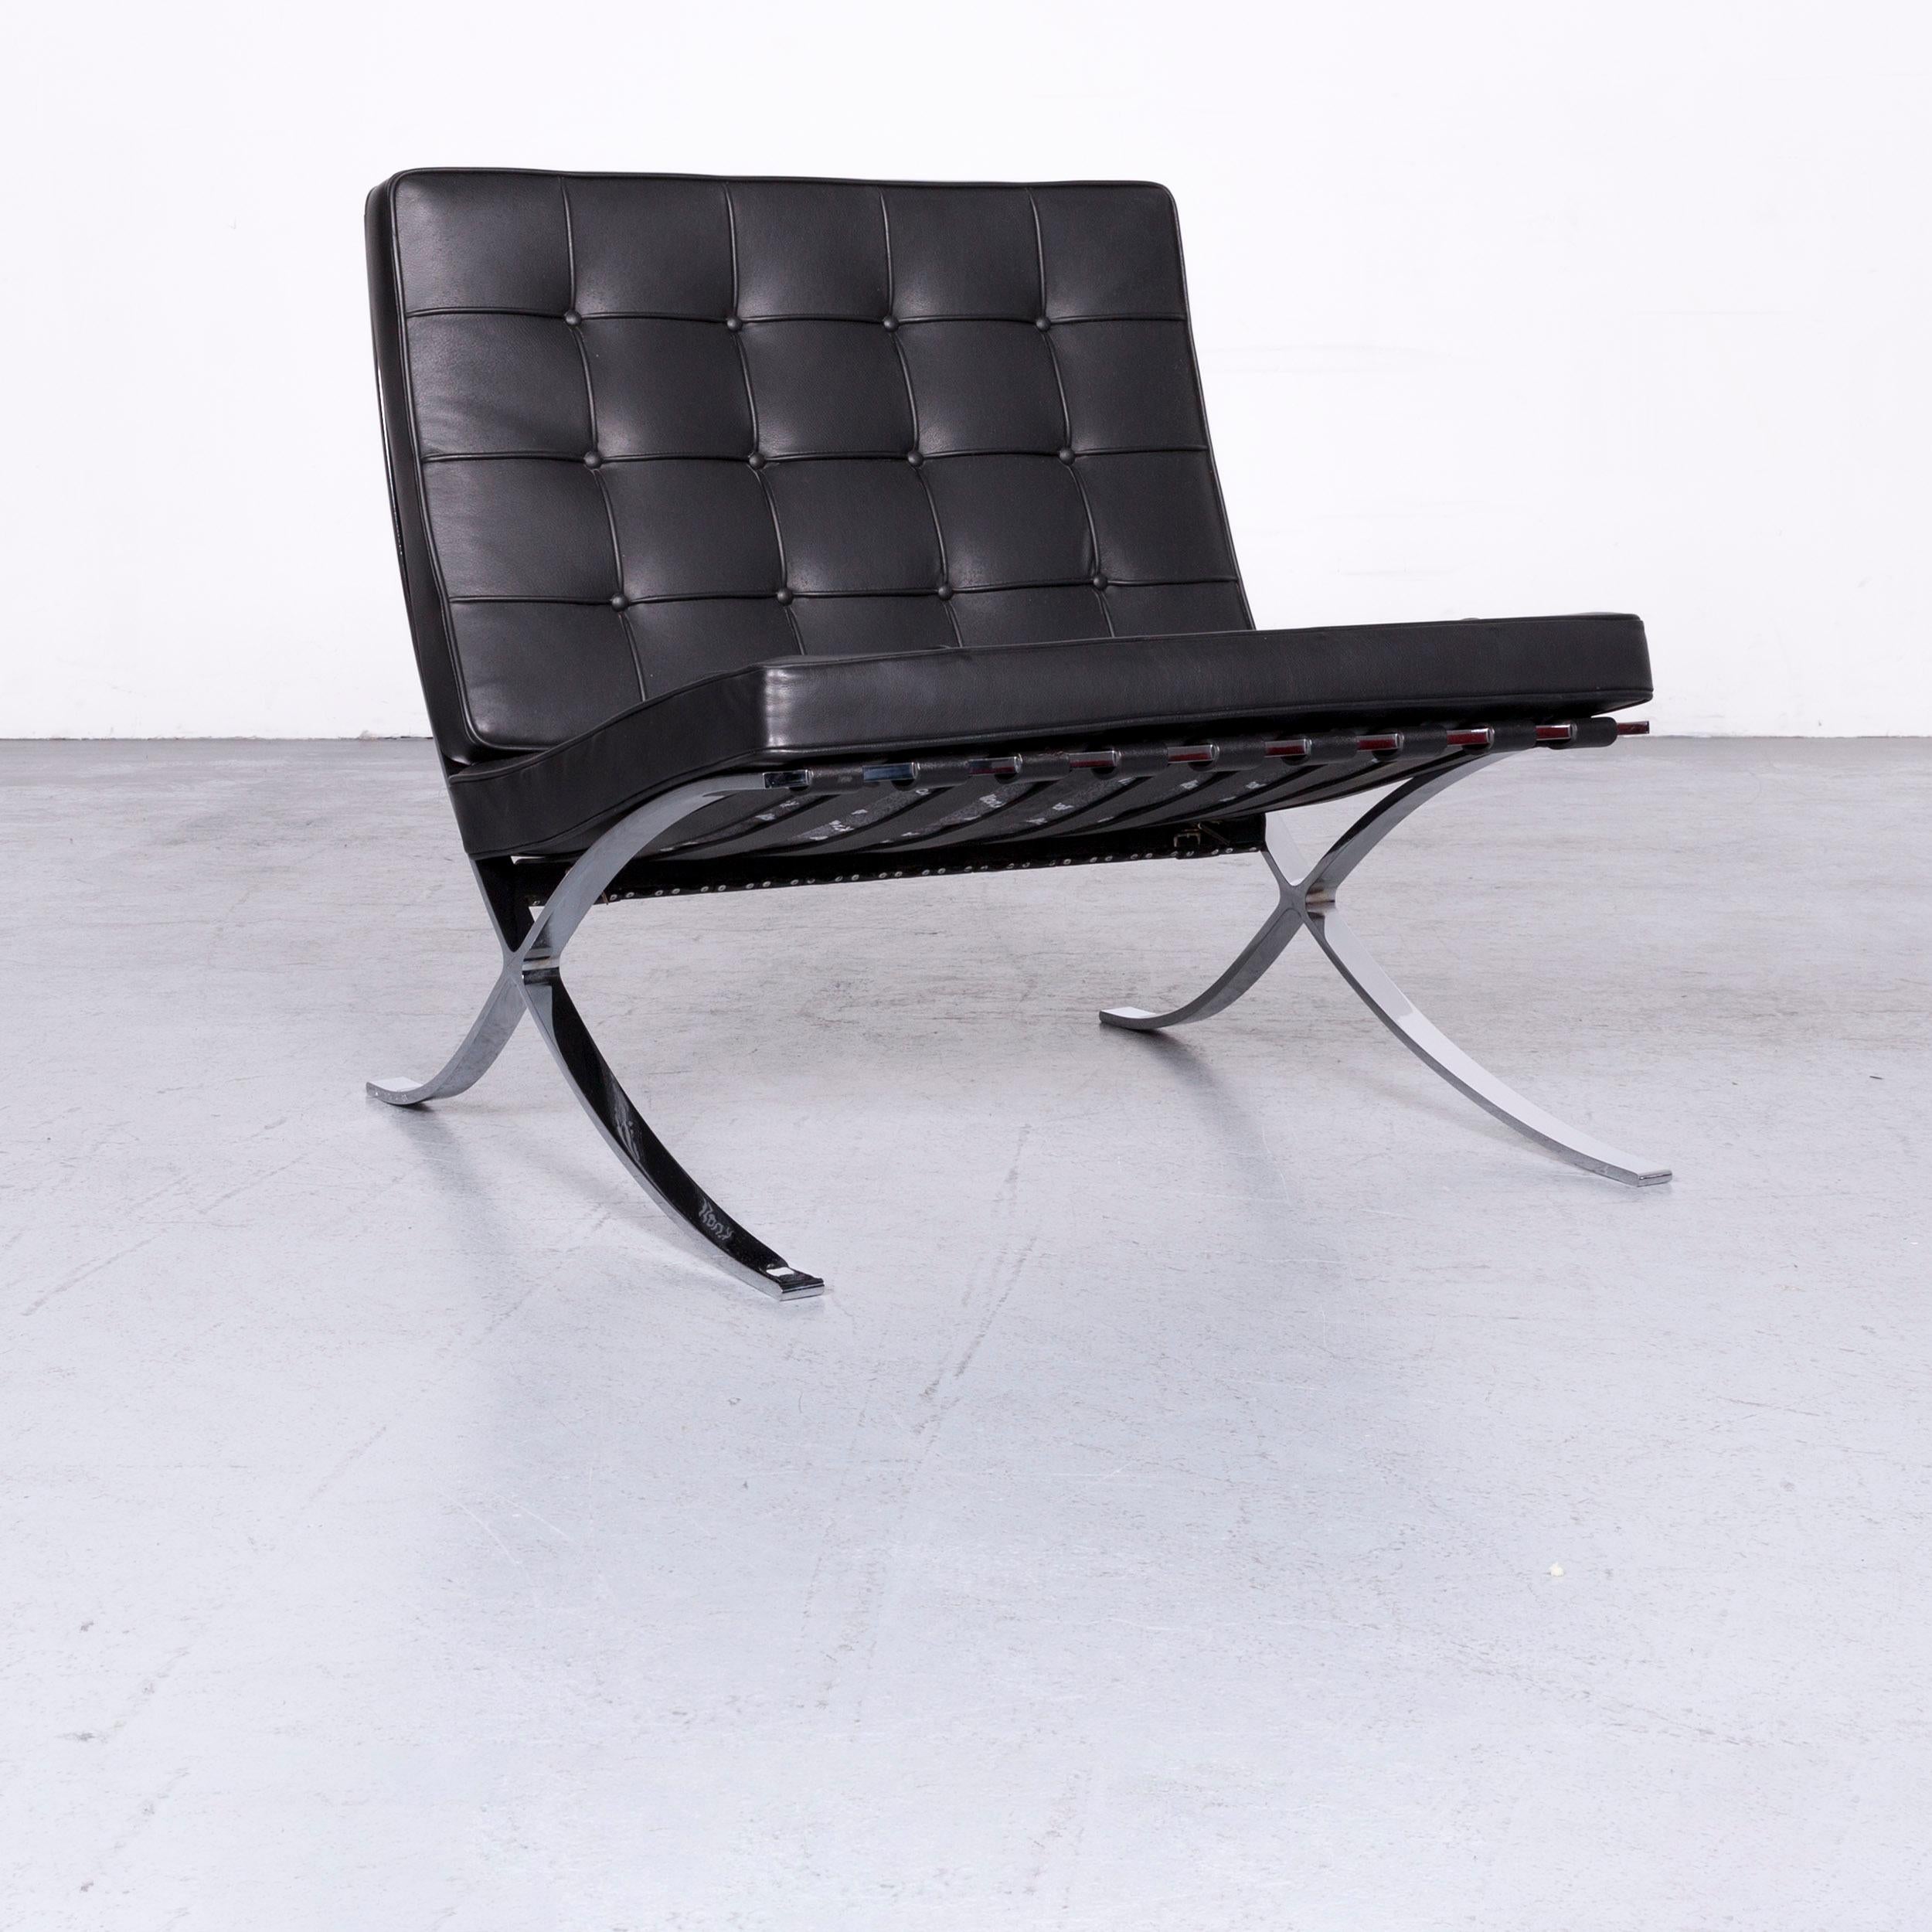 Knoll International Barcelona chair black leather Ludwig Mies van der Rohe, in a minimalistic and modern design, made for pure comfort.